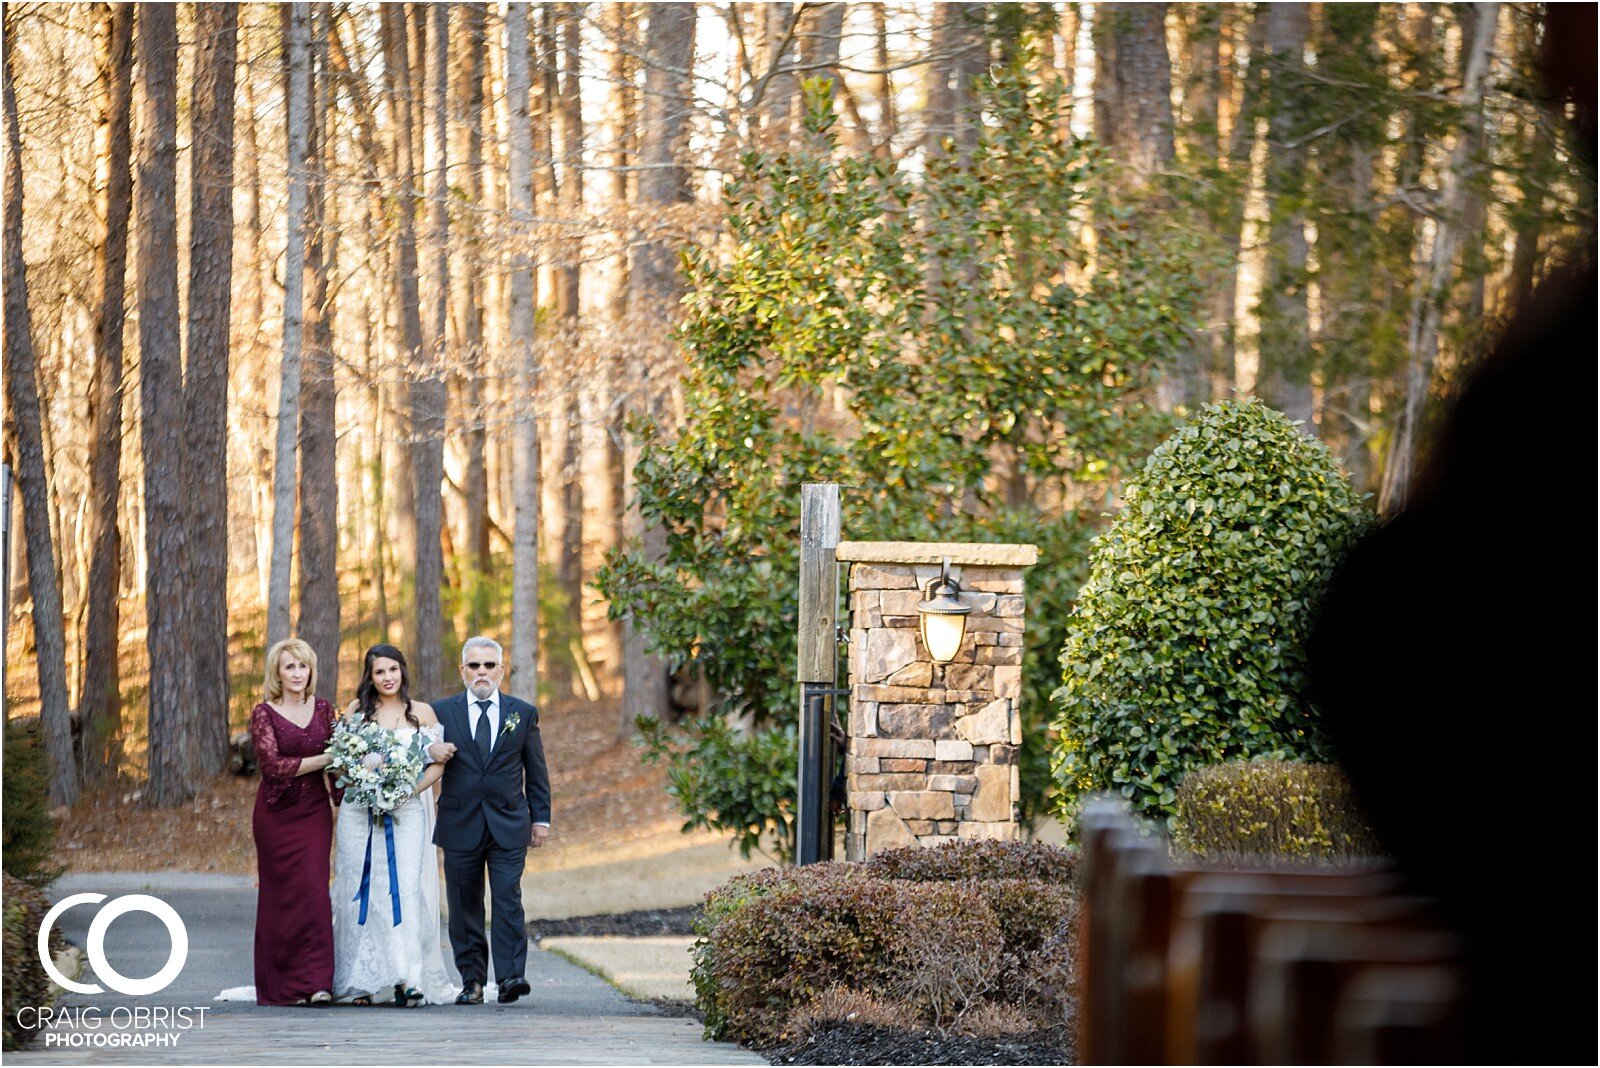 in the woods events wedding portraits sunset photographer_0063.jpg